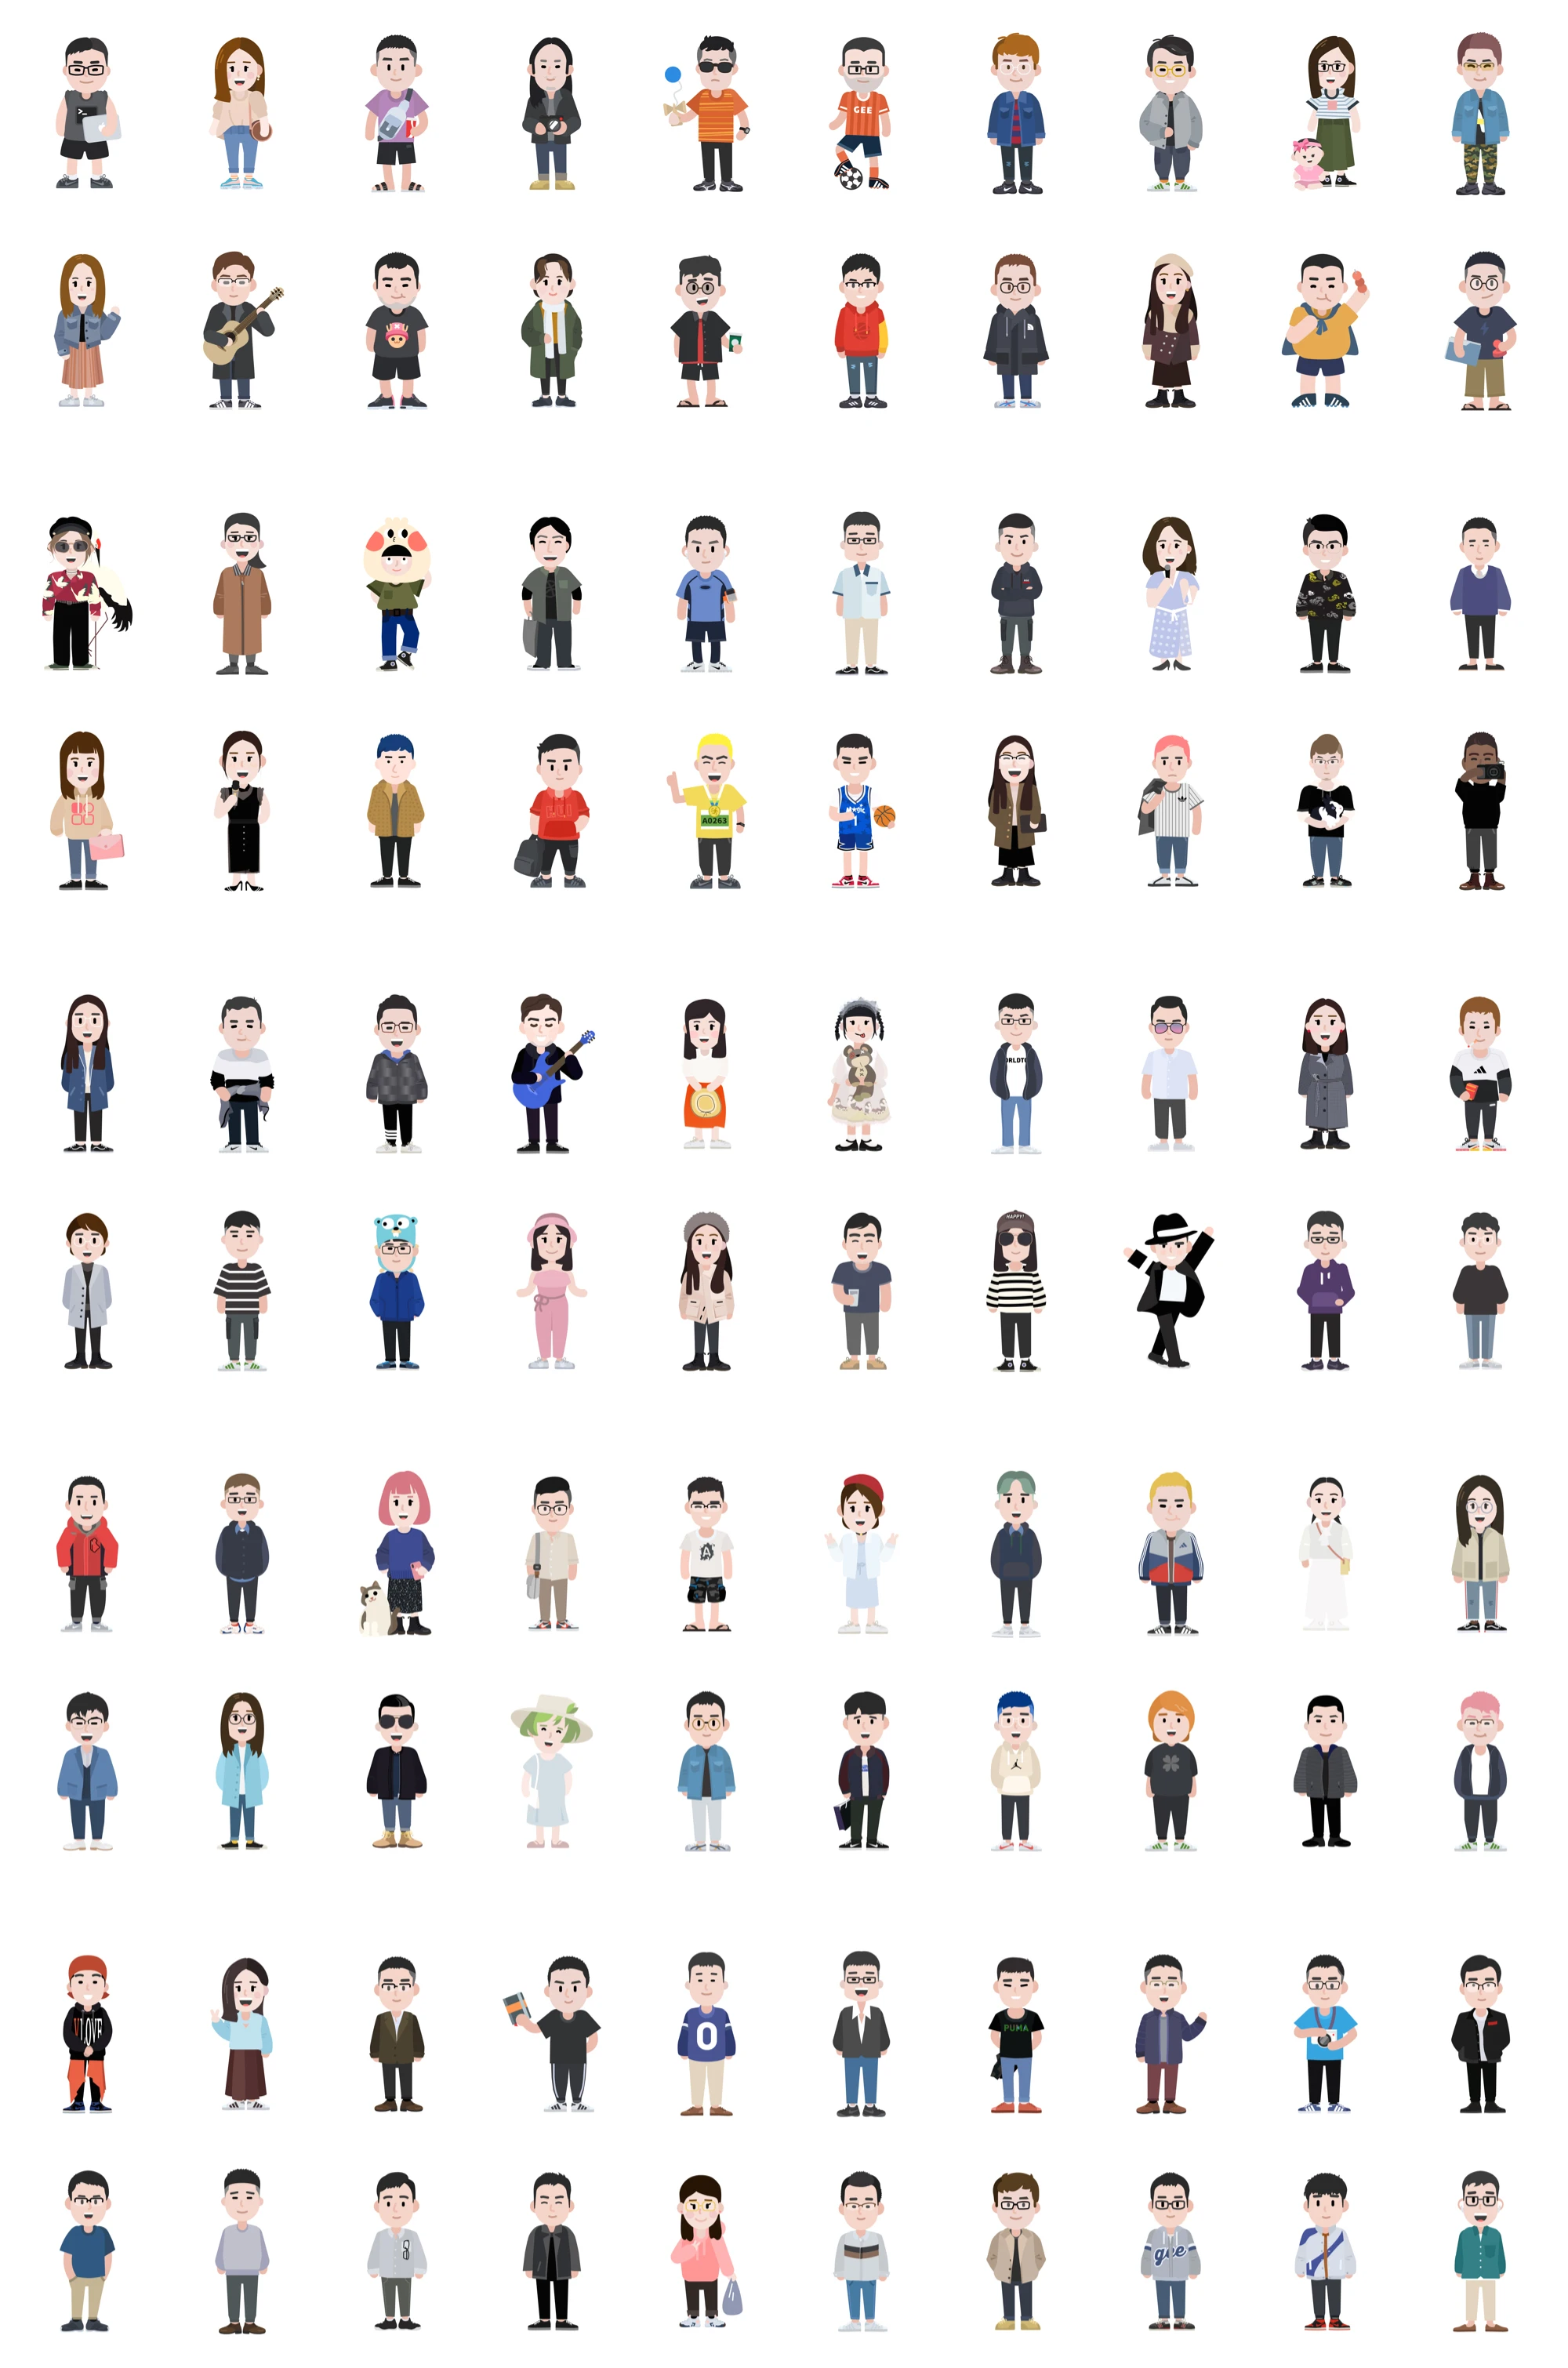 GEE! ME - 100 Illustration Characters - GEE! ME is a great set of flat graphics required, 100 cartoon characters and over 400 coolest objects. You can use it in any design or development projects. It’s completely free and just enjoy it